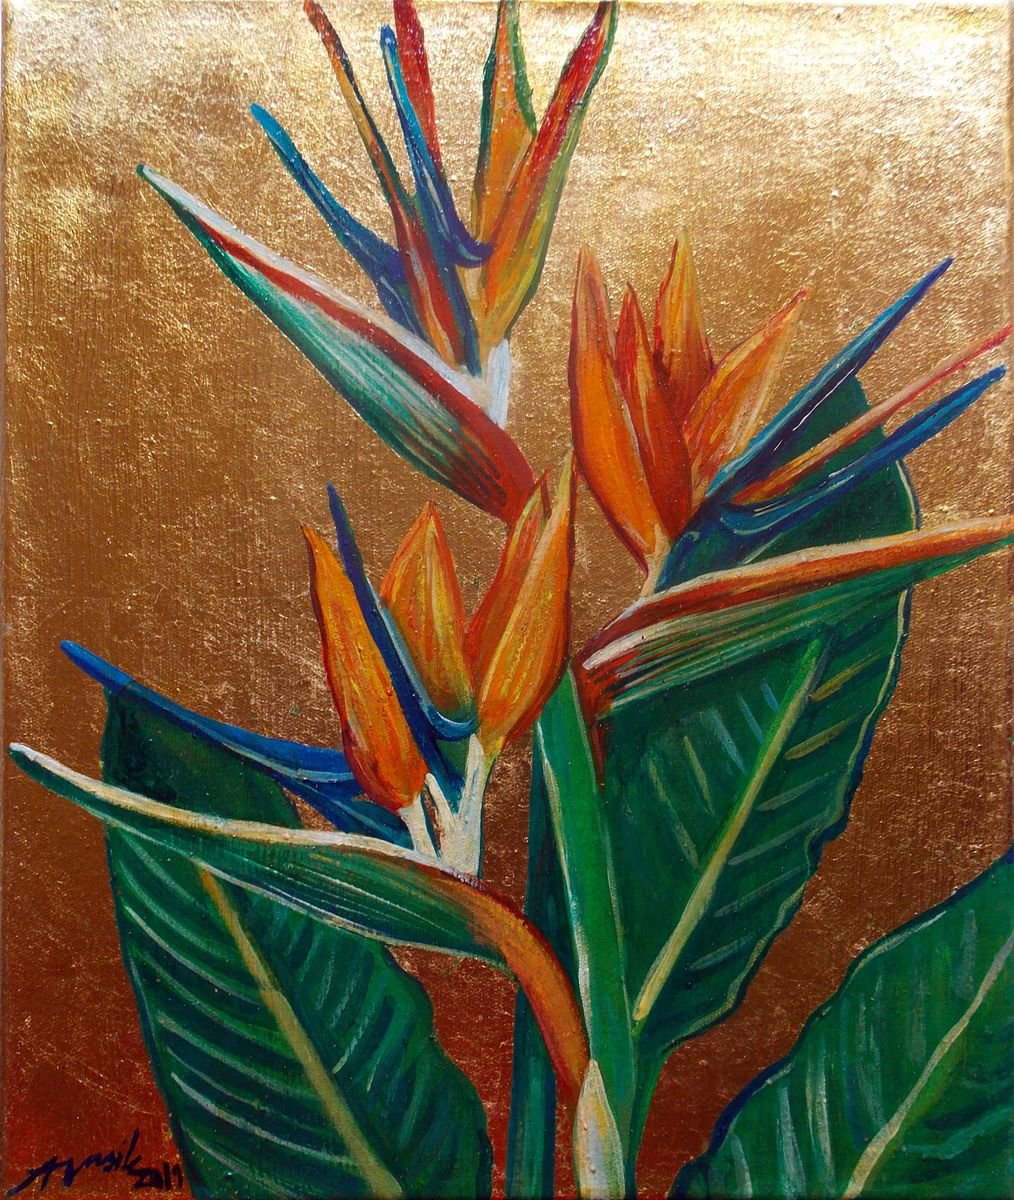 Strelitzia - Bird of Paradise Flowers - Original Painting in Acrylic with Golden Leaf on C... by Adriana Vasile